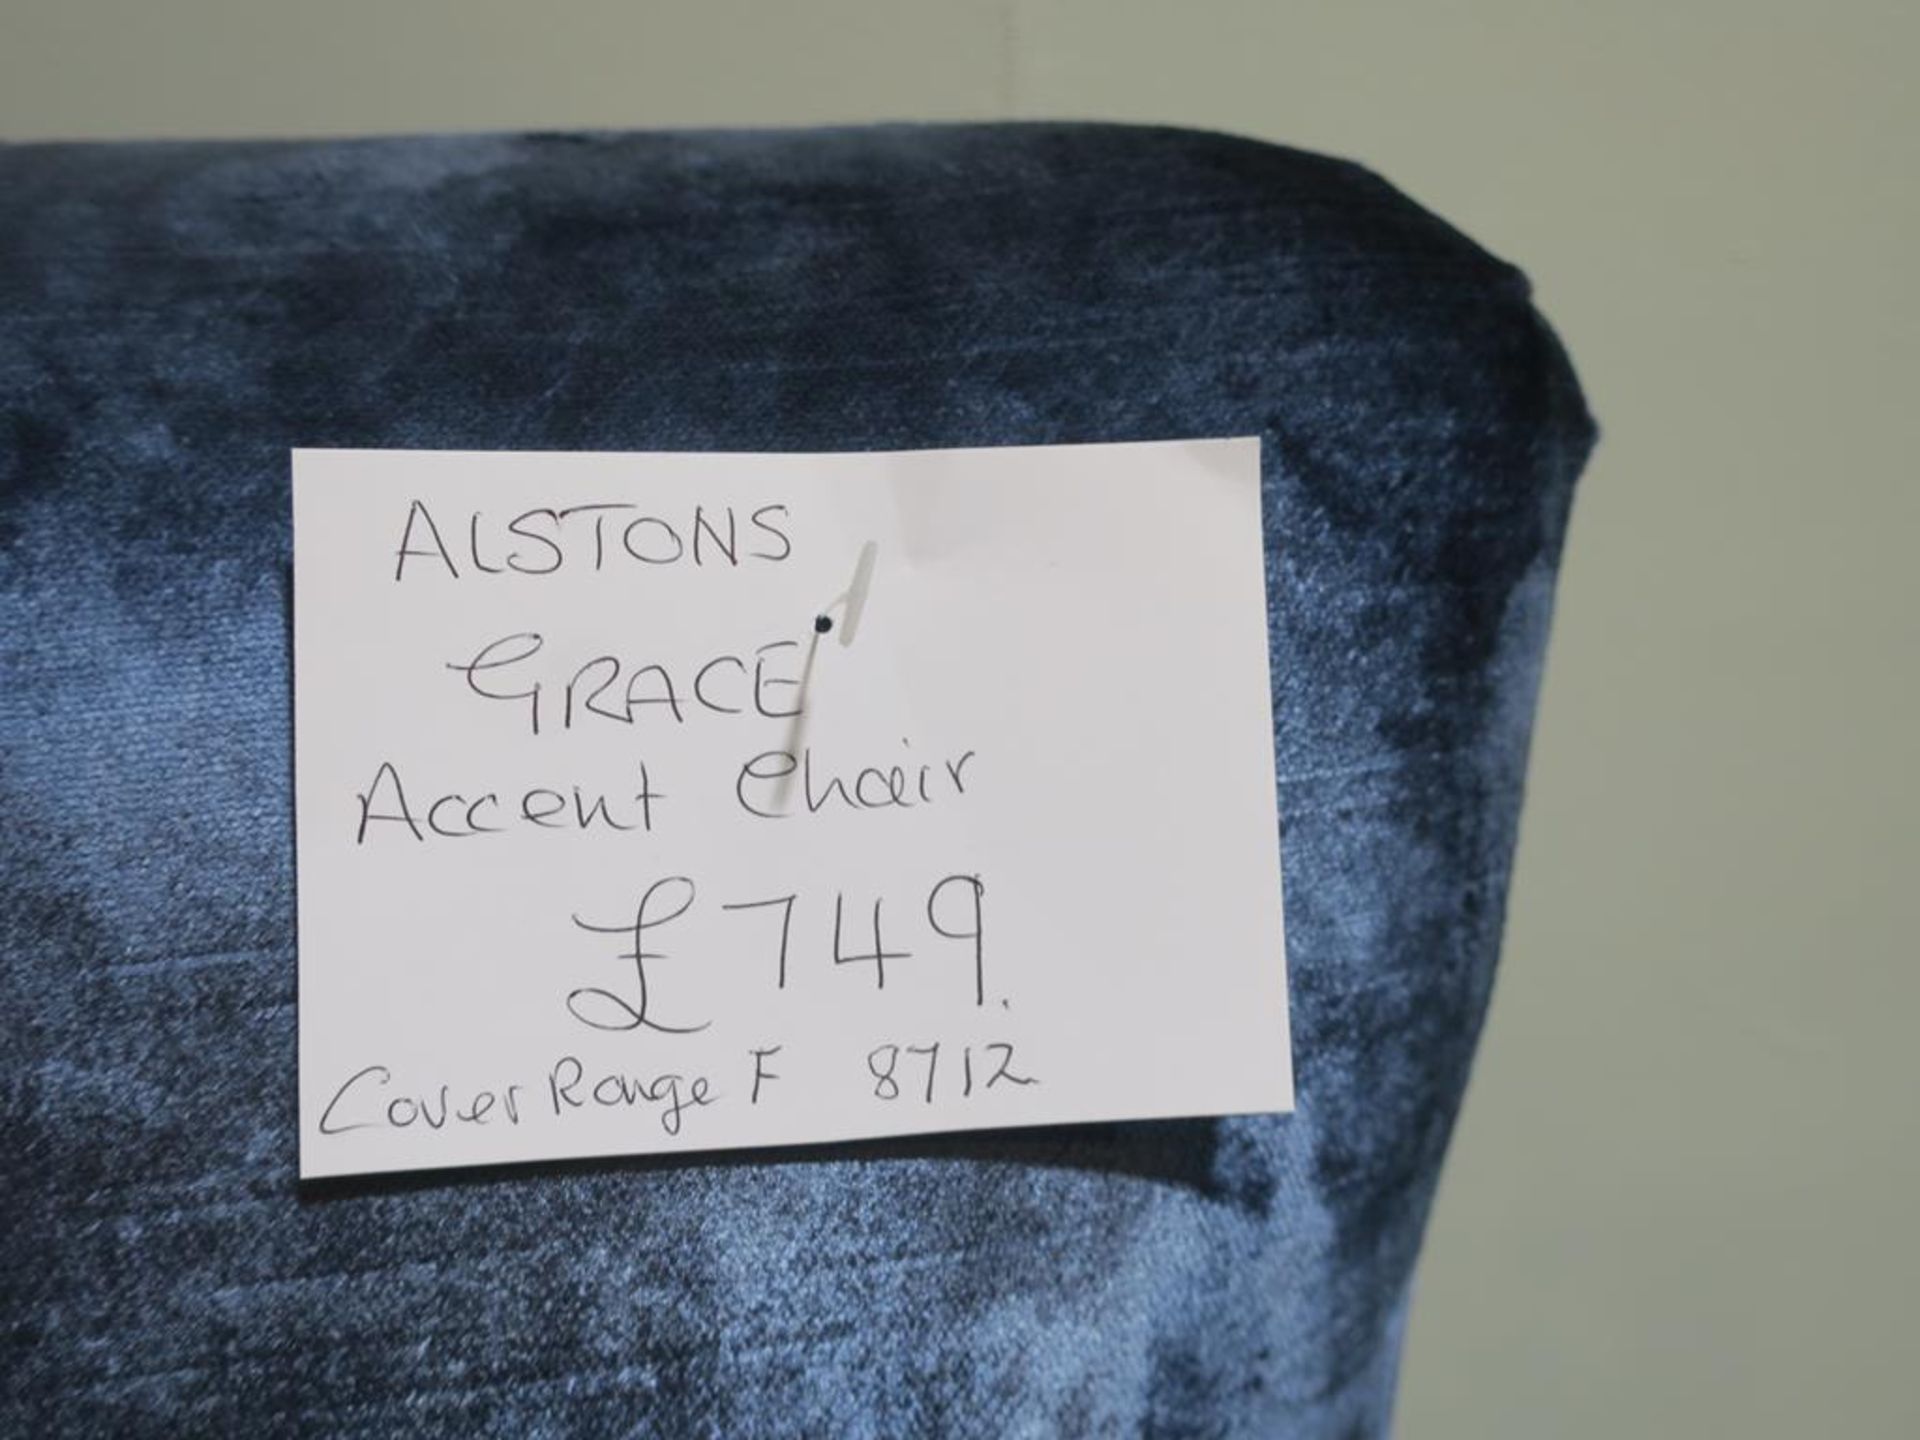 * An Alston Grace Accent Chair (W 82cm) cover range F 8712 with brass castors to the front (width - Image 6 of 6